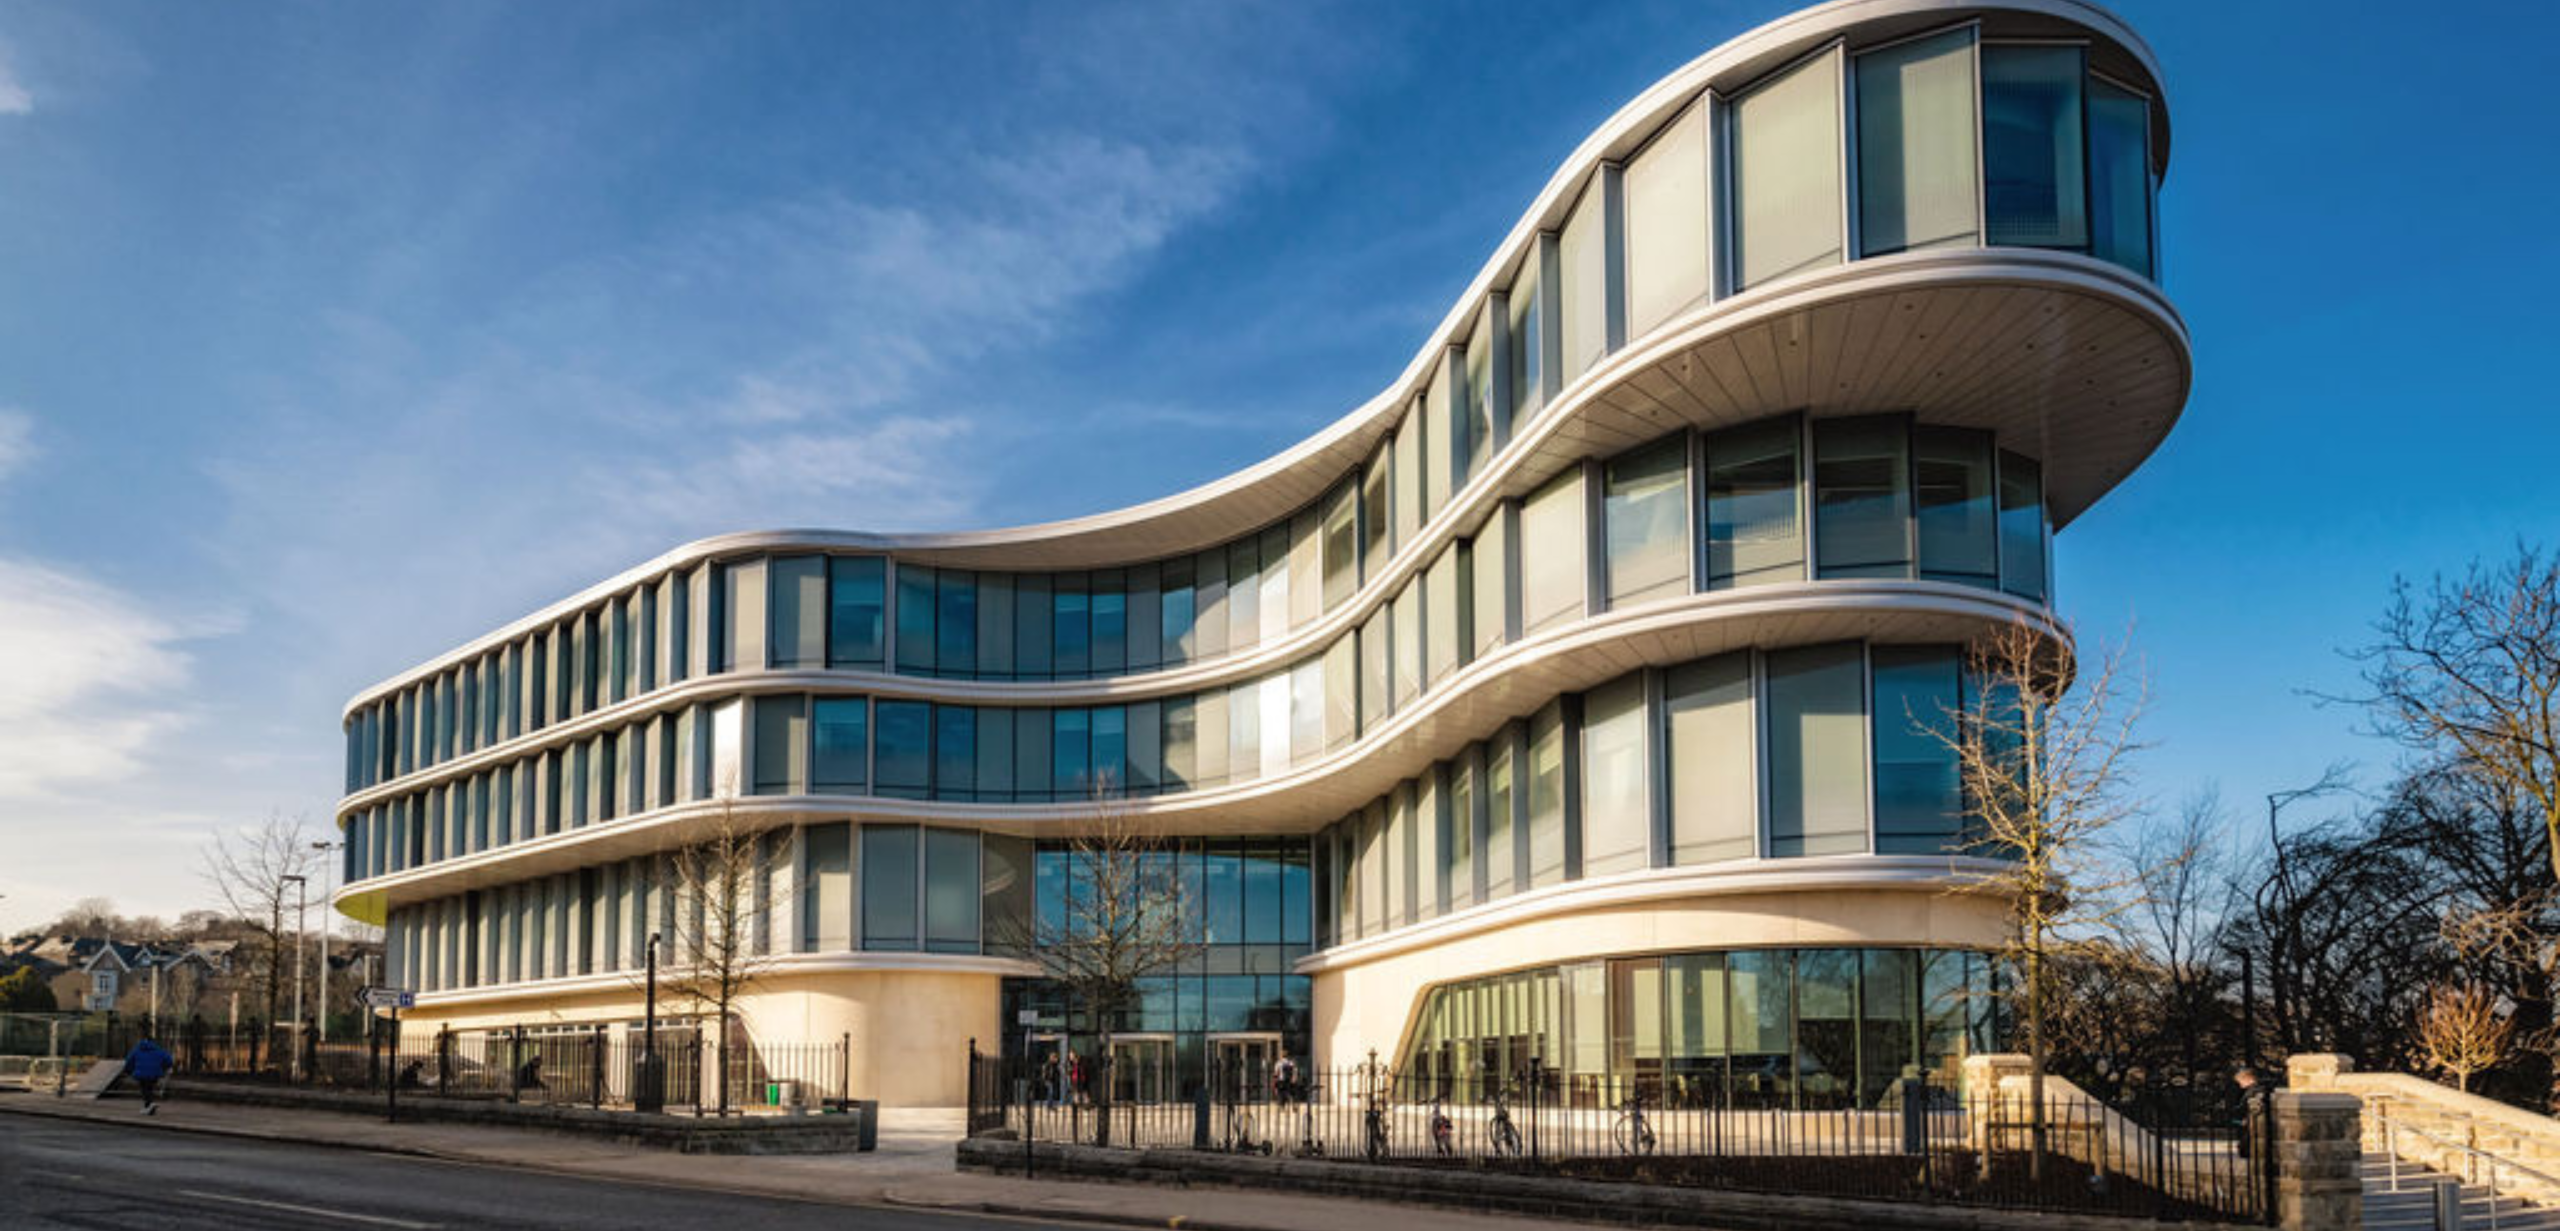 A modern office building with curved glass windows at the University of Sheffield